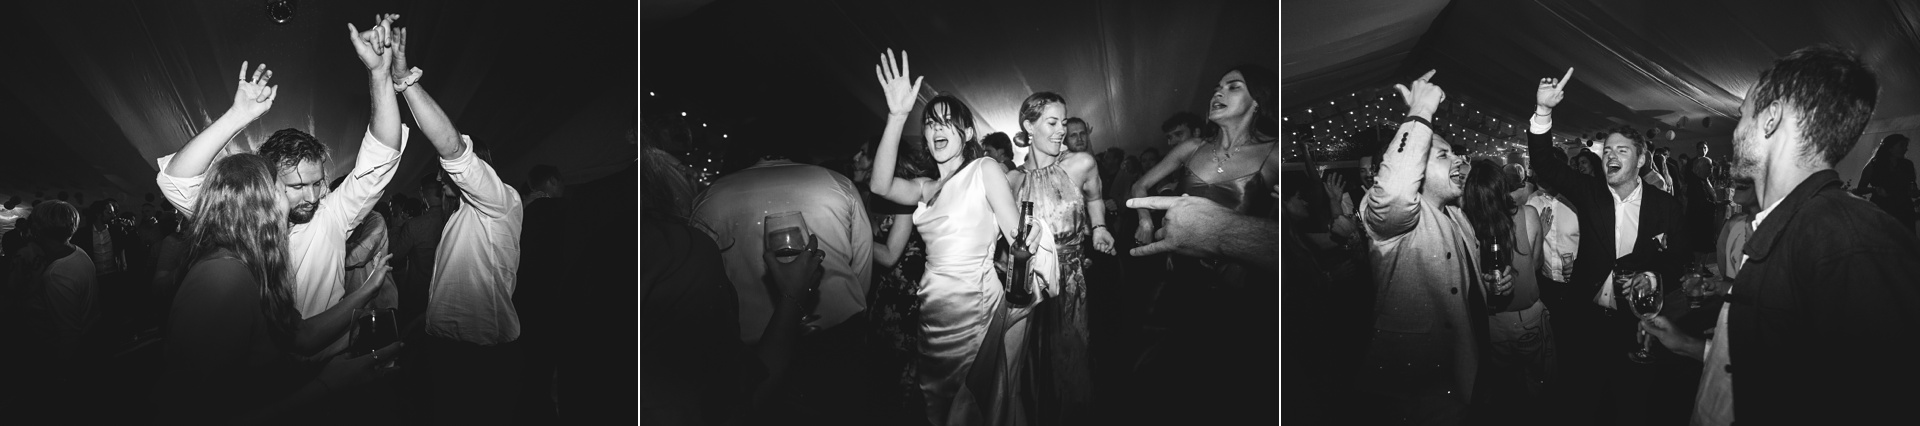 A stylish bride dancing with her wedding guests